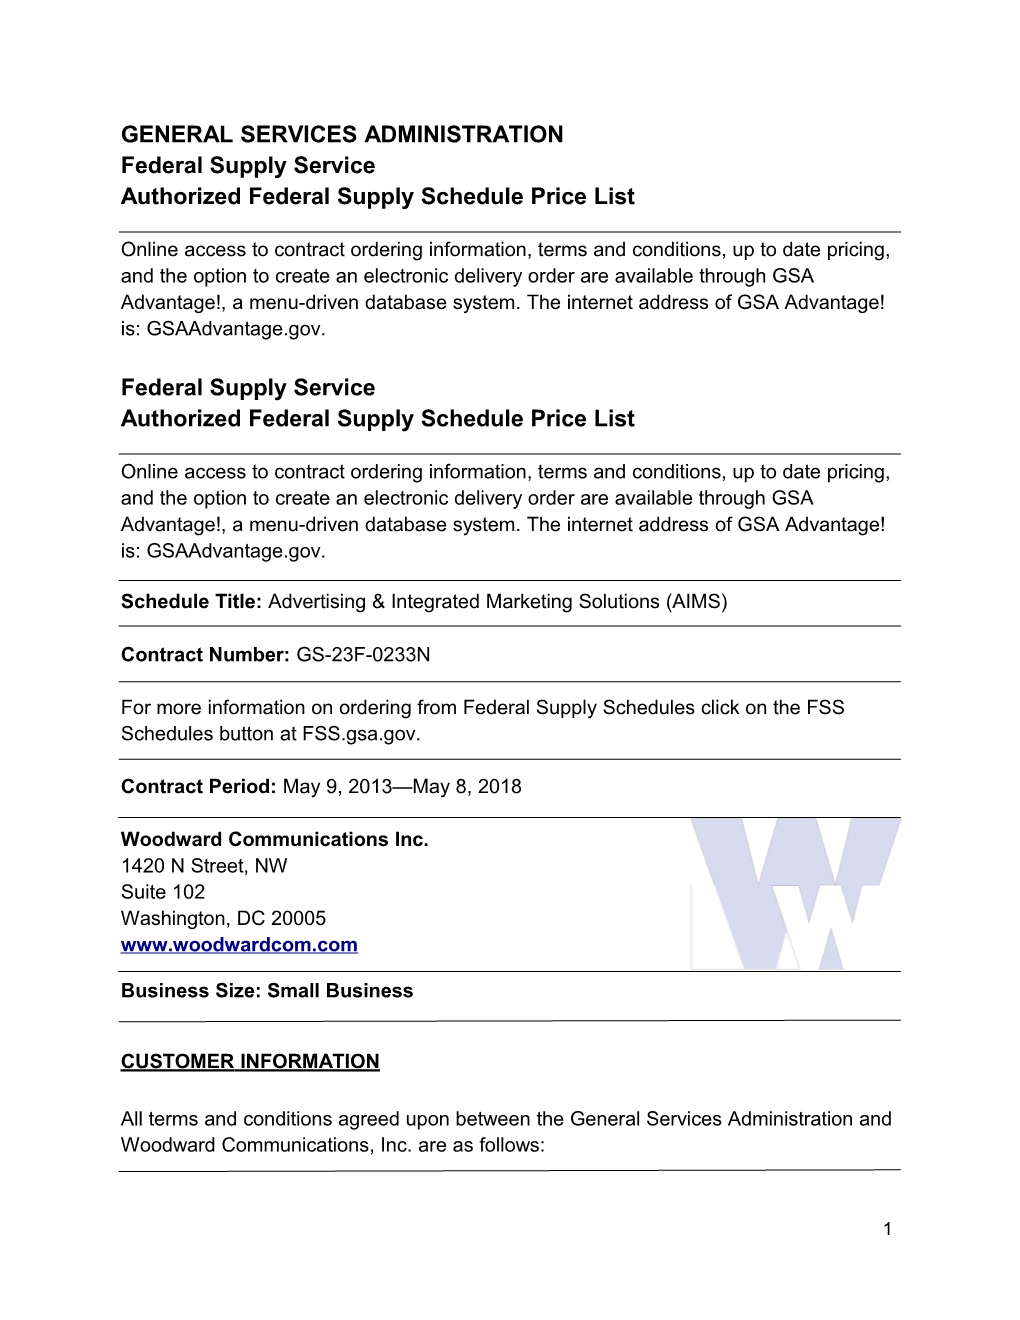 Authorized Federal Supply Schedule Price List s10